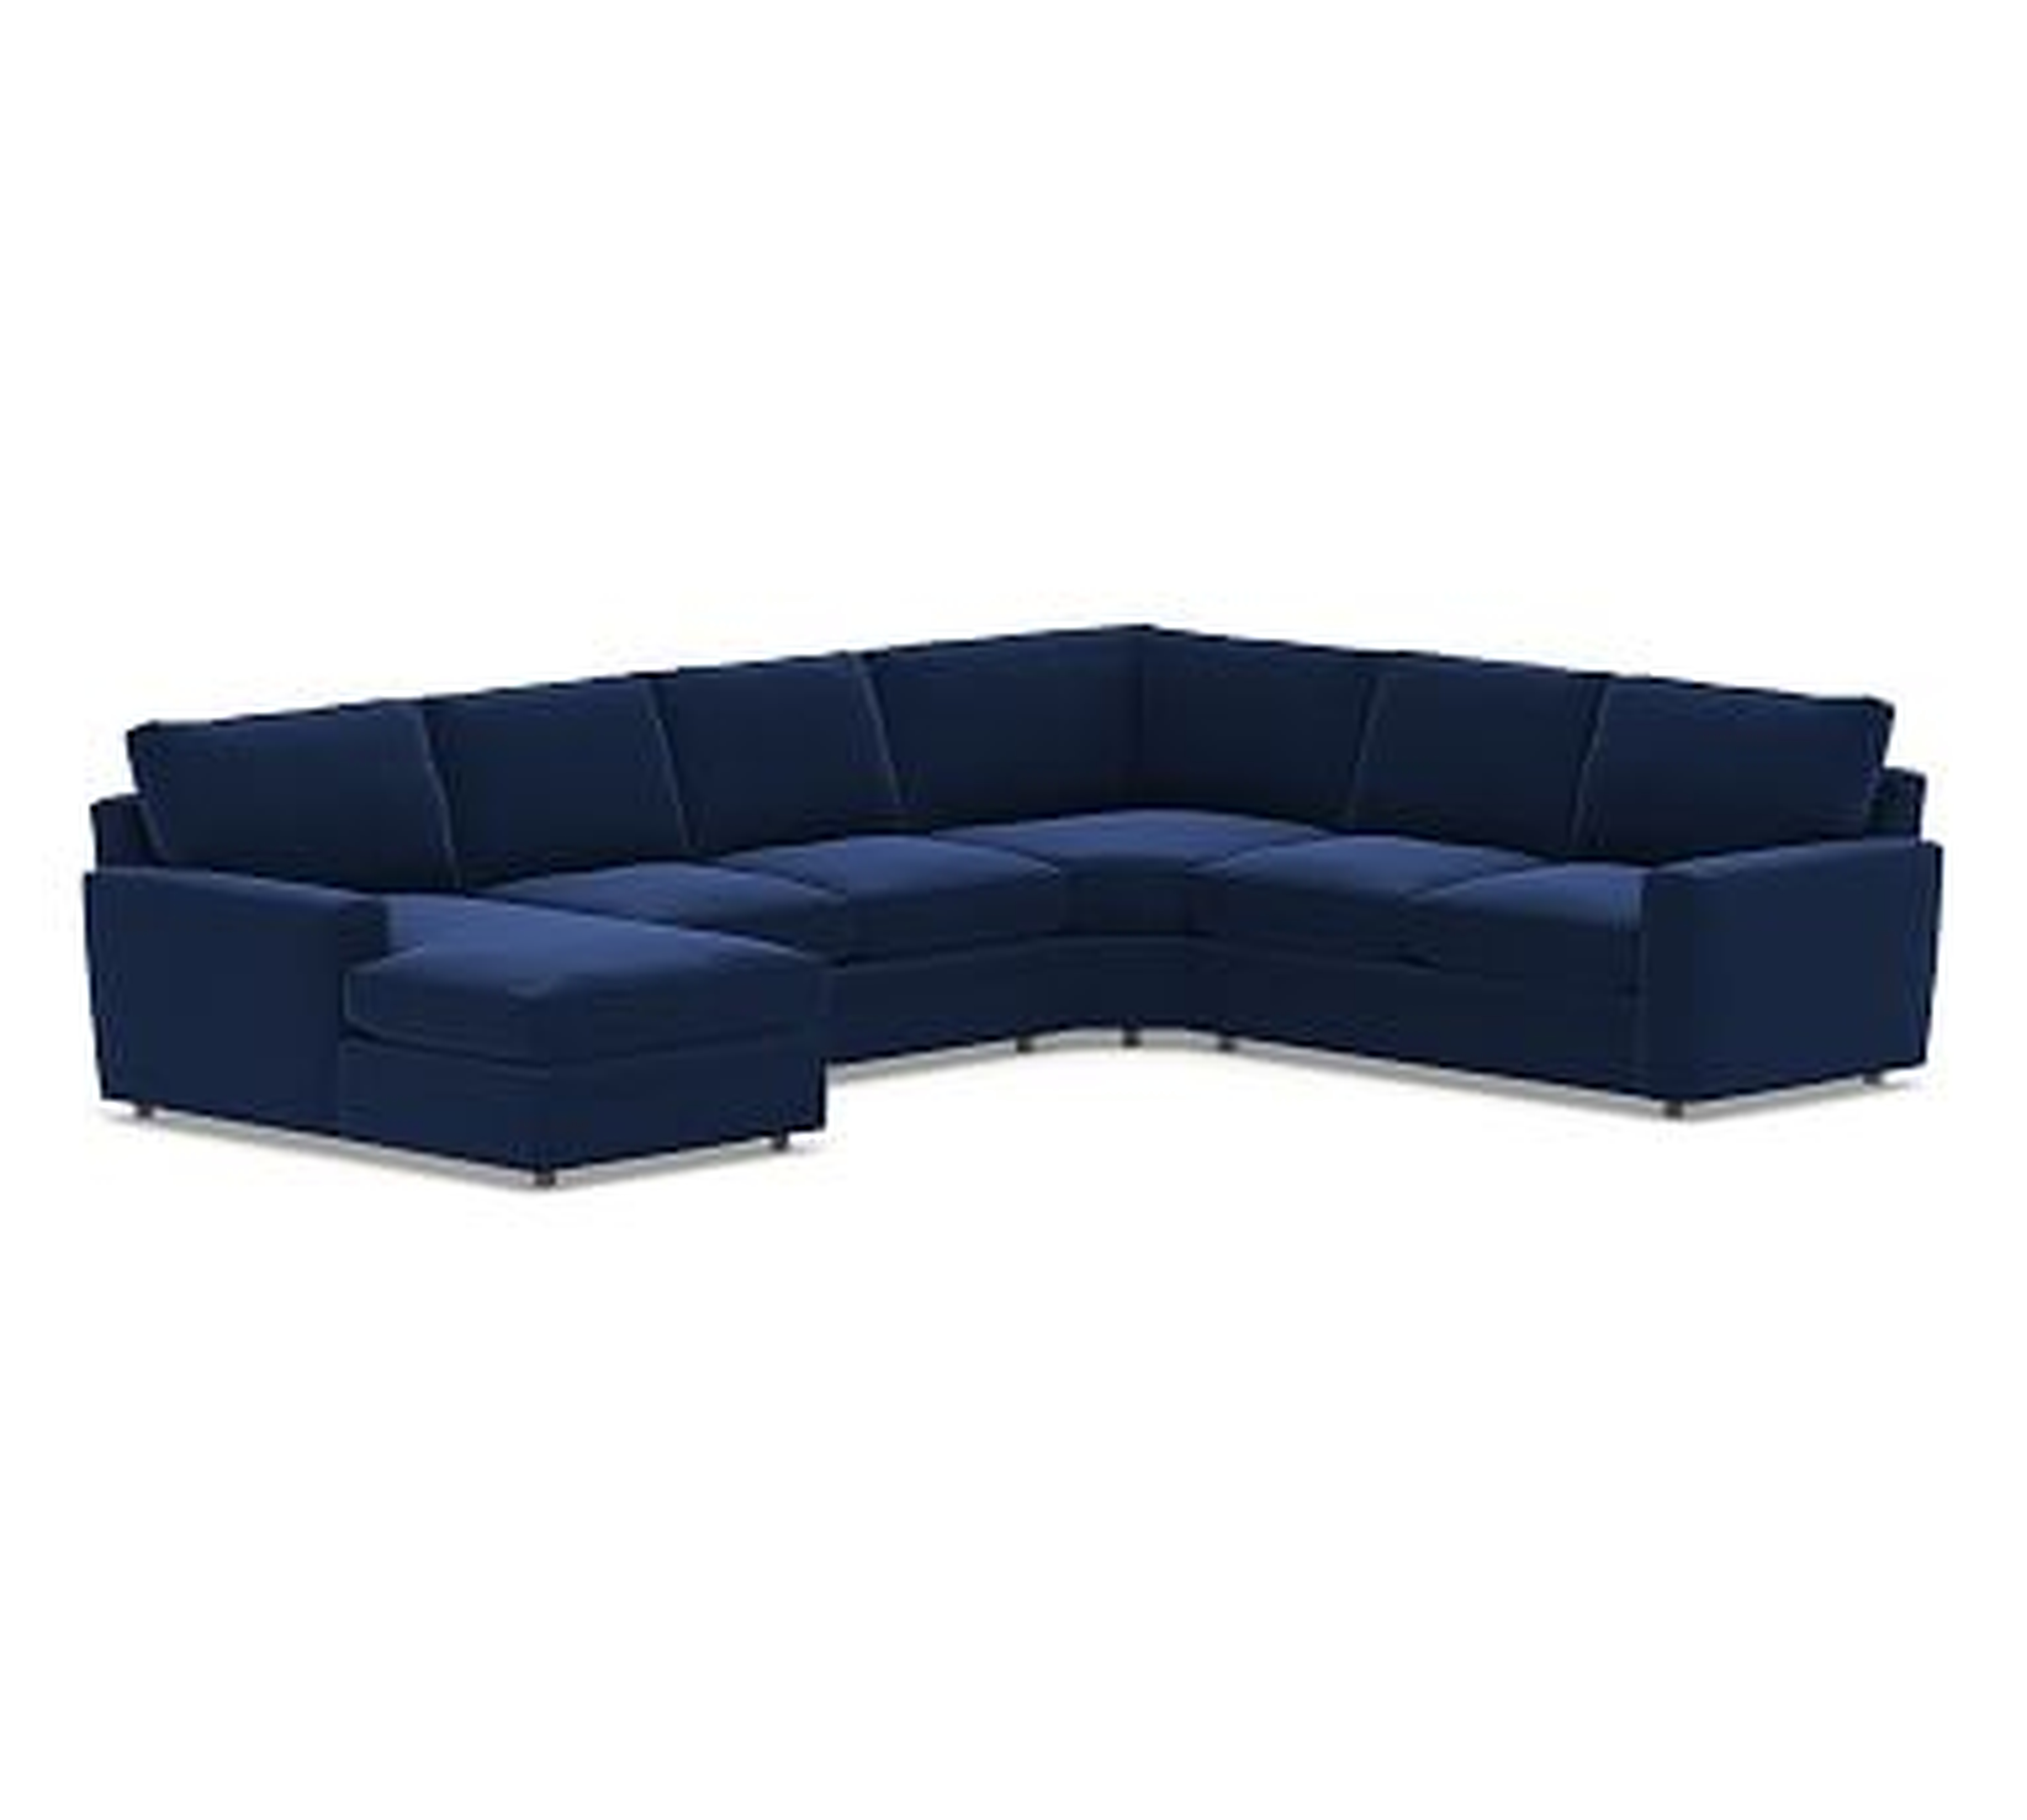 Pearce Square Arm Upholstered Left Arm 4-Piece Wedge Sectional, Down Blend Wrapped Cushions, Performance Everydayvelvet(TM) Navy - Pottery Barn